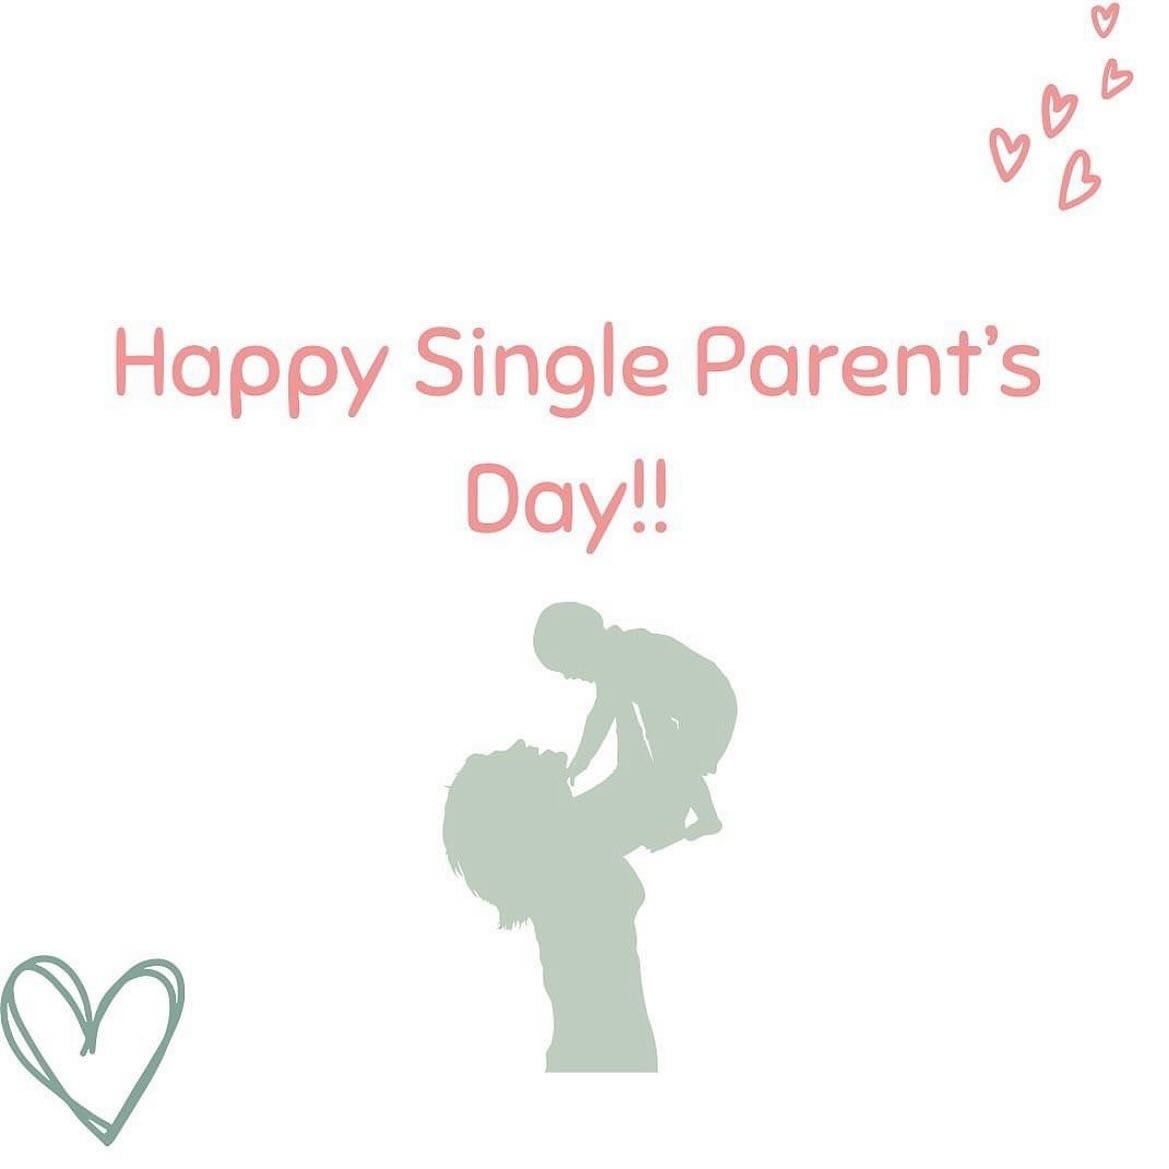 Today, on National Single Parent Day, I&rsquo;m calling out the incredible strength and resilience of single parents everywhere. As someone deeply invested in empowering families and communities, this day aligns perfectly with my mission. To all the 